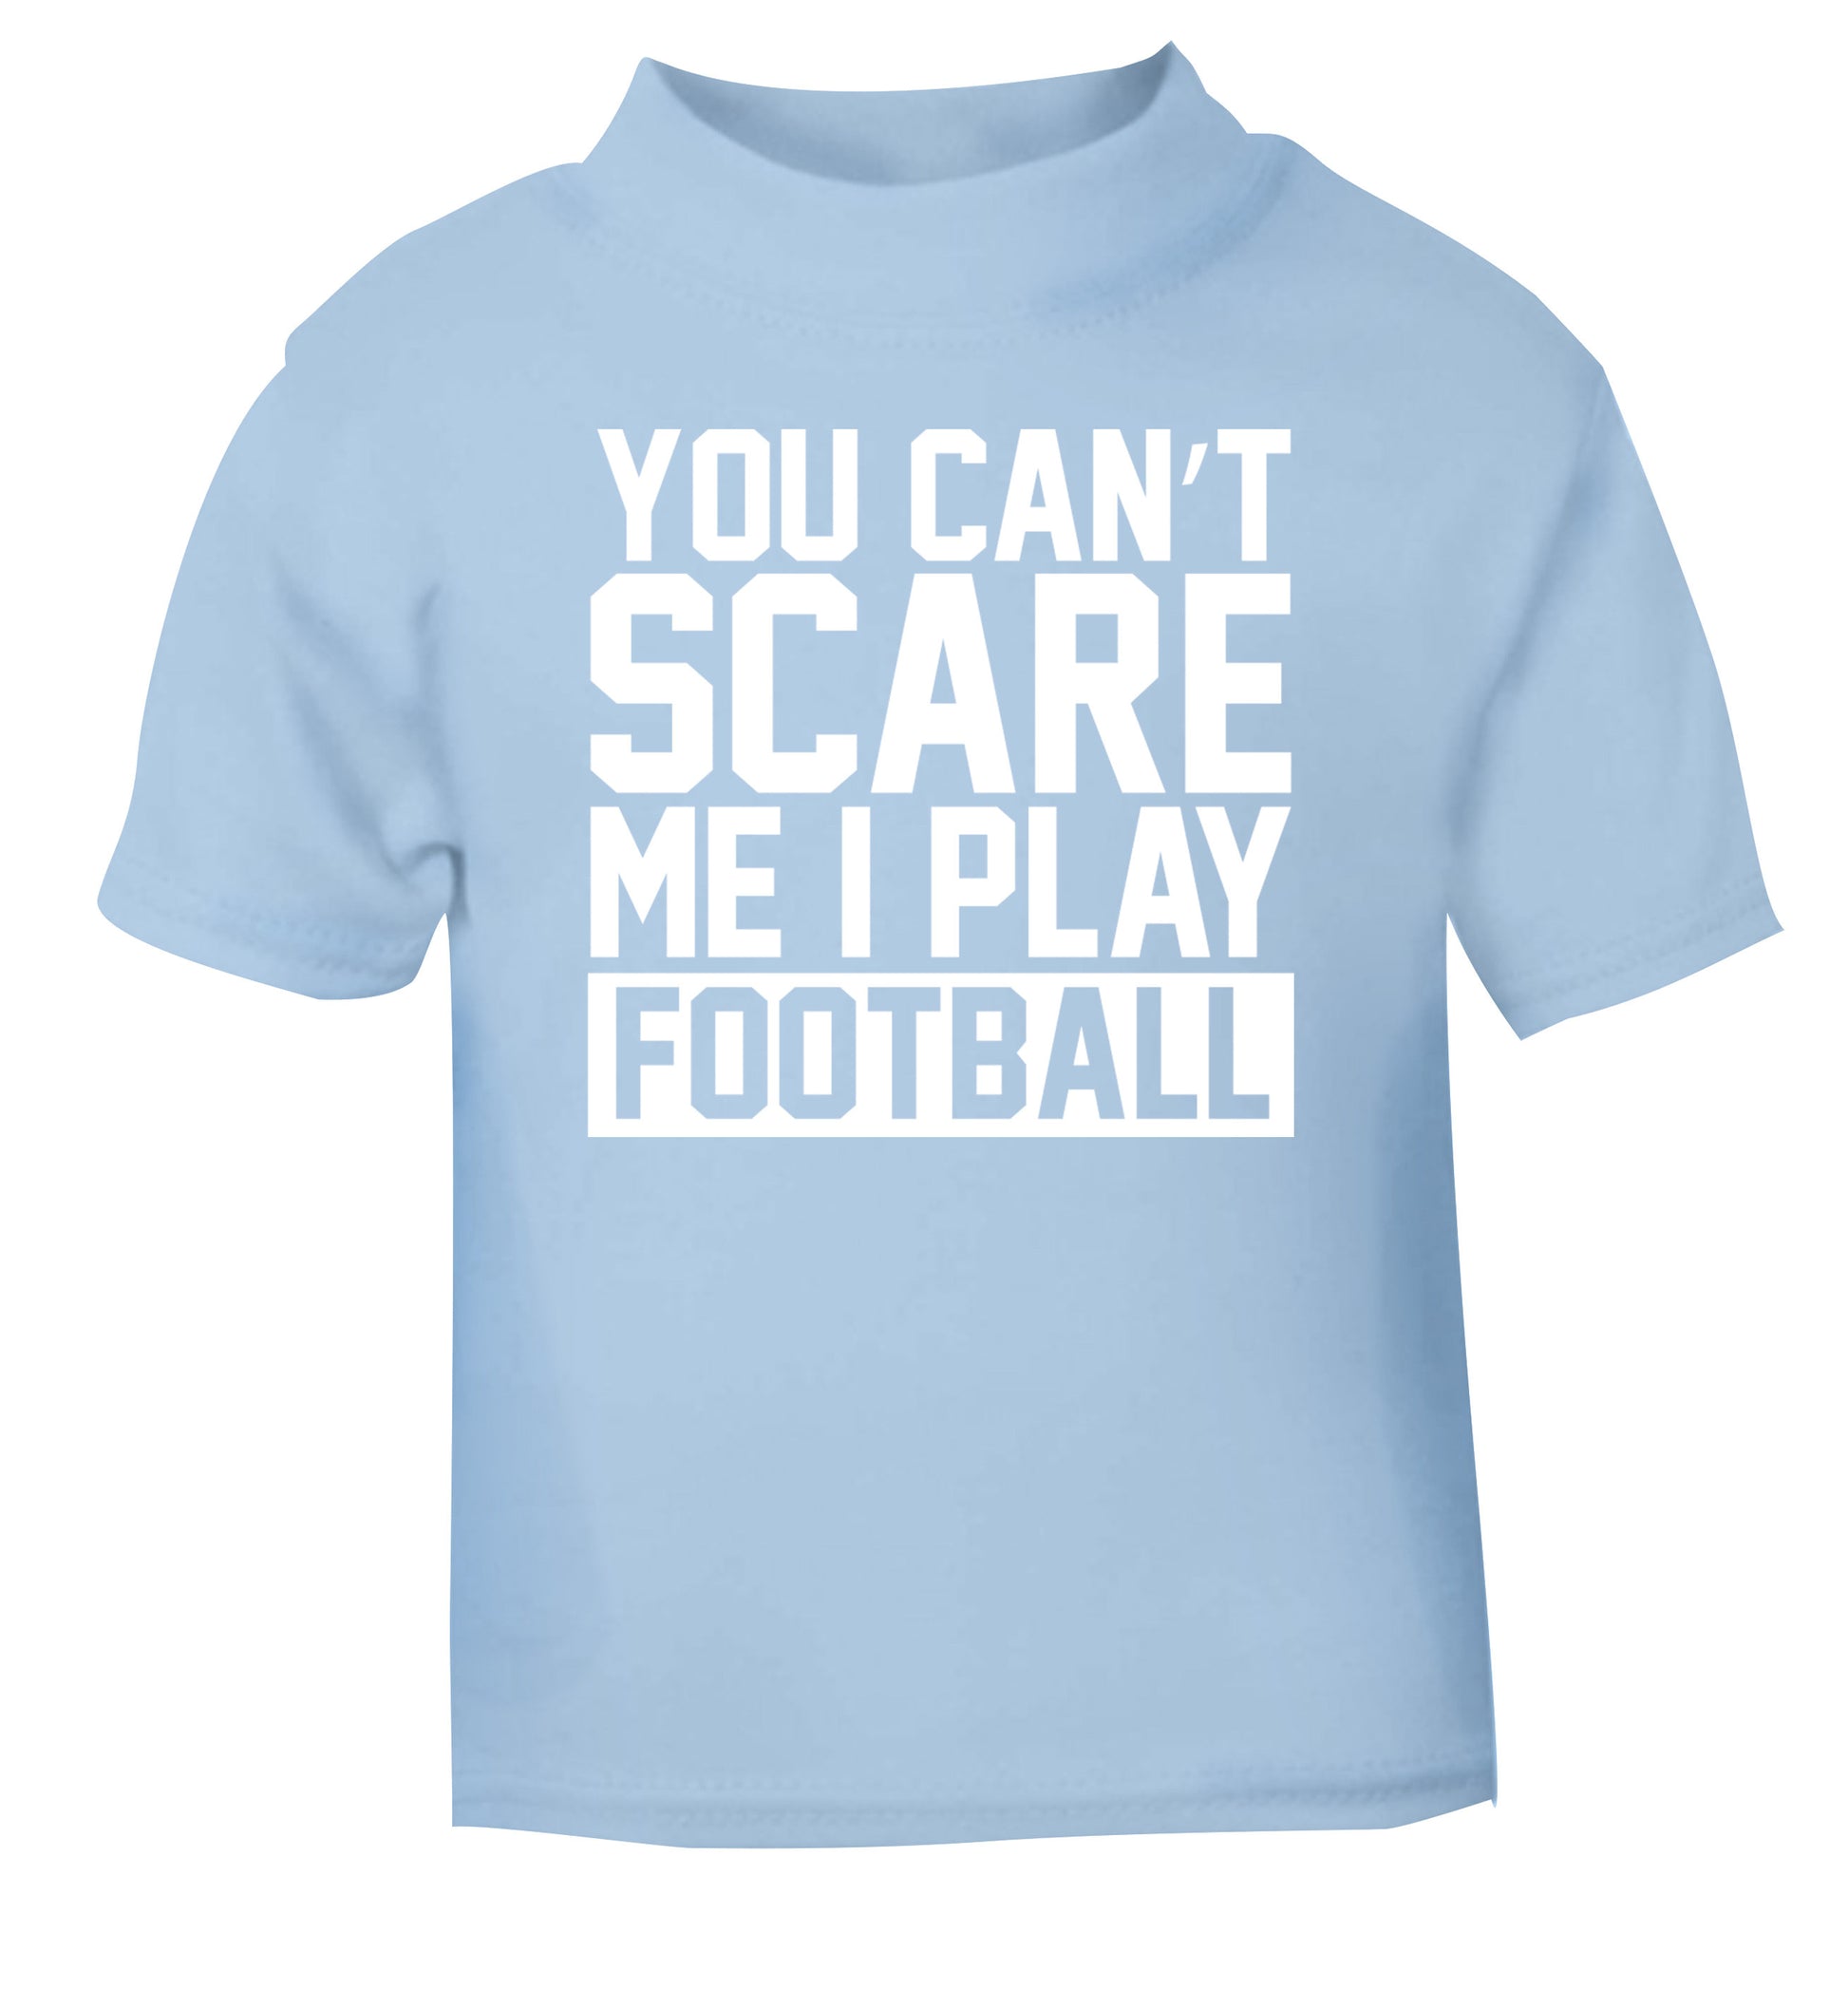 You can't scare me I play football light blue Baby Toddler Tshirt 2 Years